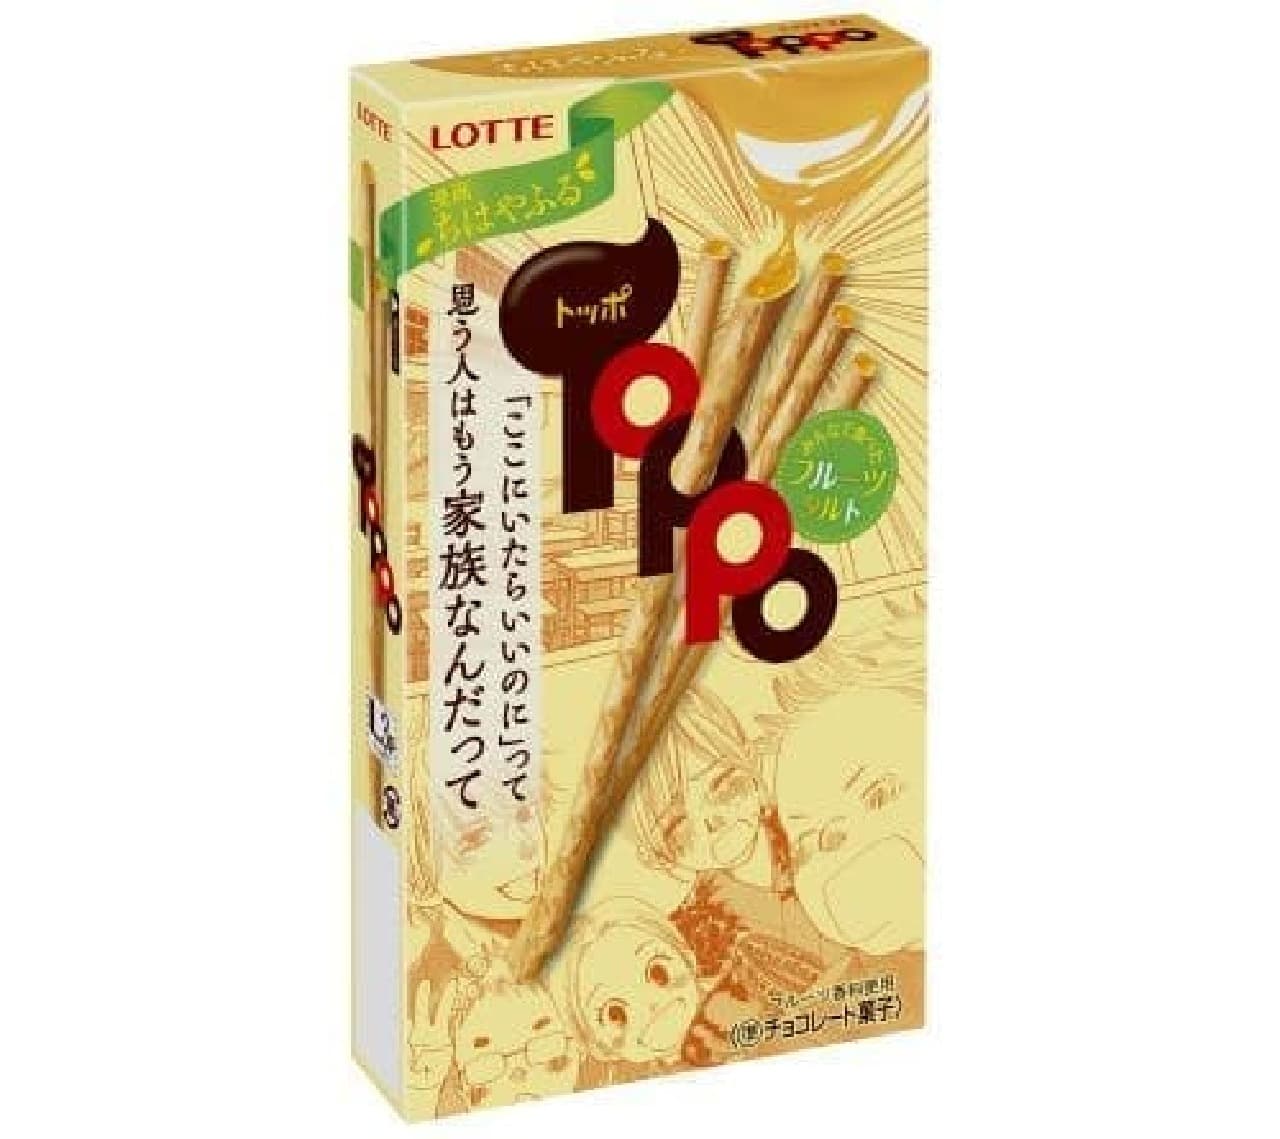 "Toppo x Chihayafuru [Fruit Tart]" is a Toppo inspired by the "Fruit Tart" that appears in the manga "Chihayafuru".